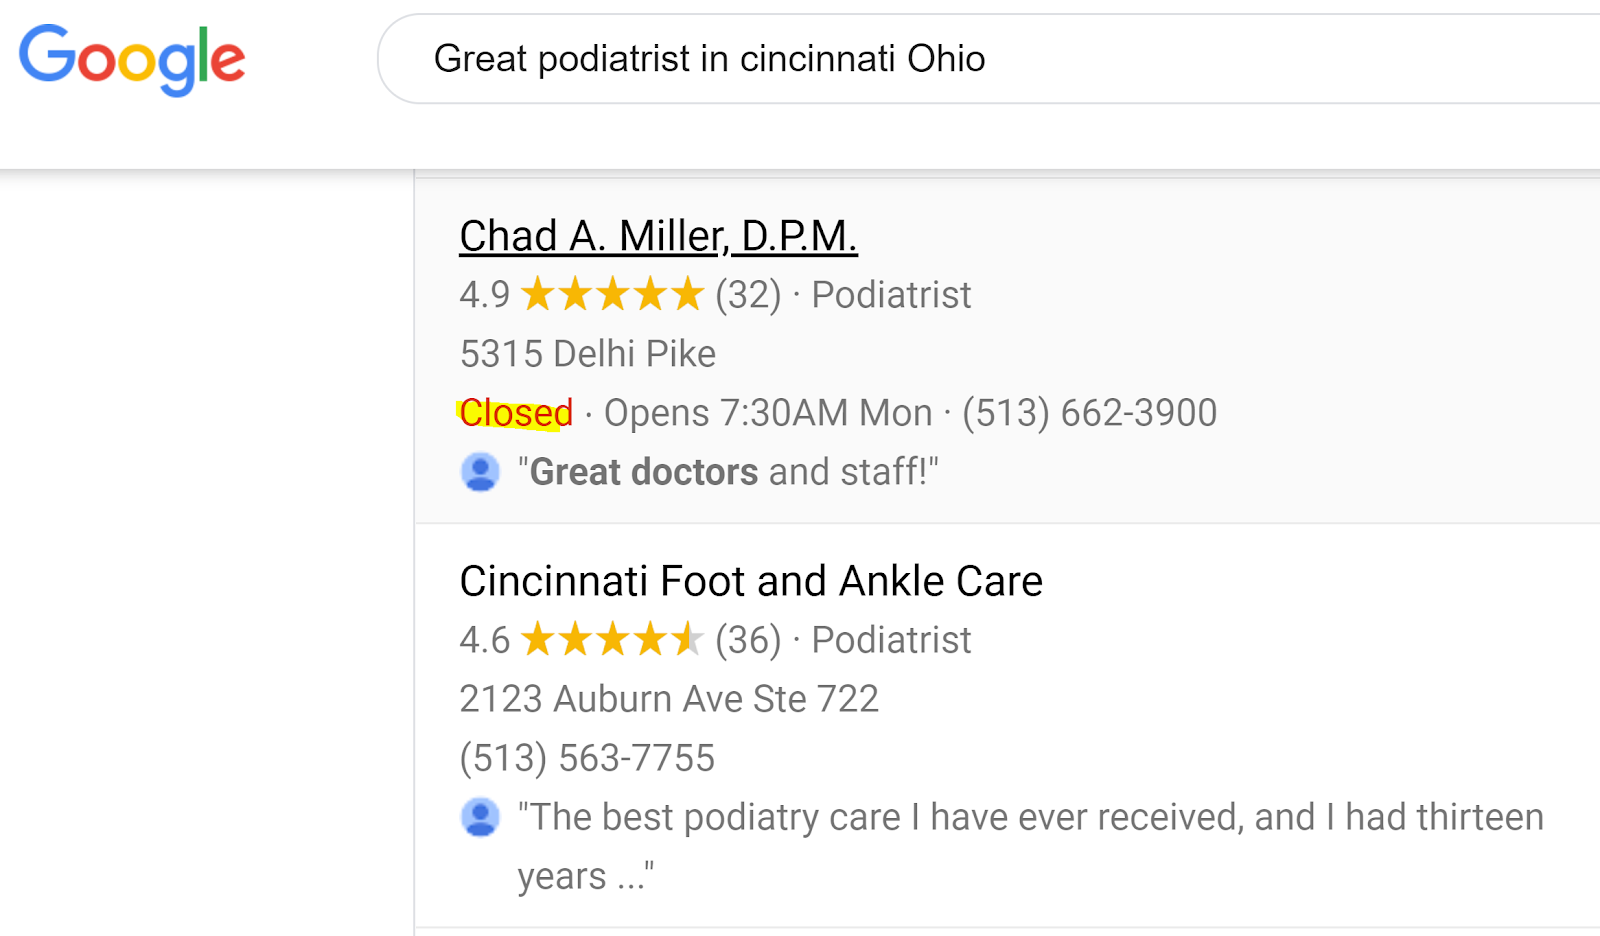 The image shows the results of a Google Search, made in California for a podiatrist in Ohio. The 2nd result is CFAC, Cincinnati Foot and Ankle Care. It's relevant because the 1st result indicated they are currently closed.